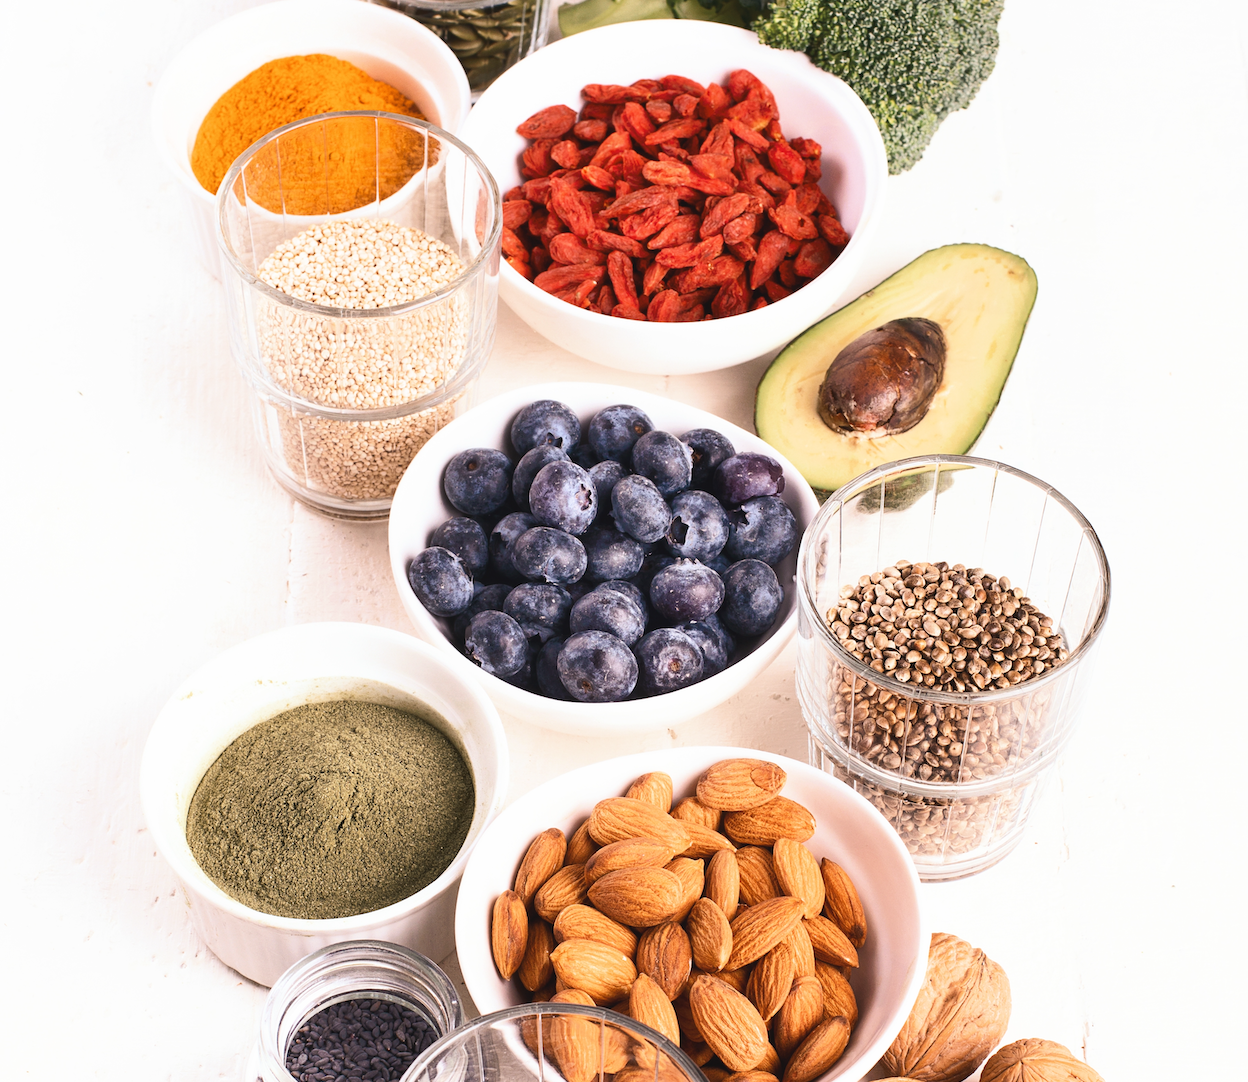 12 Superfoods That Promote Glowing Skin